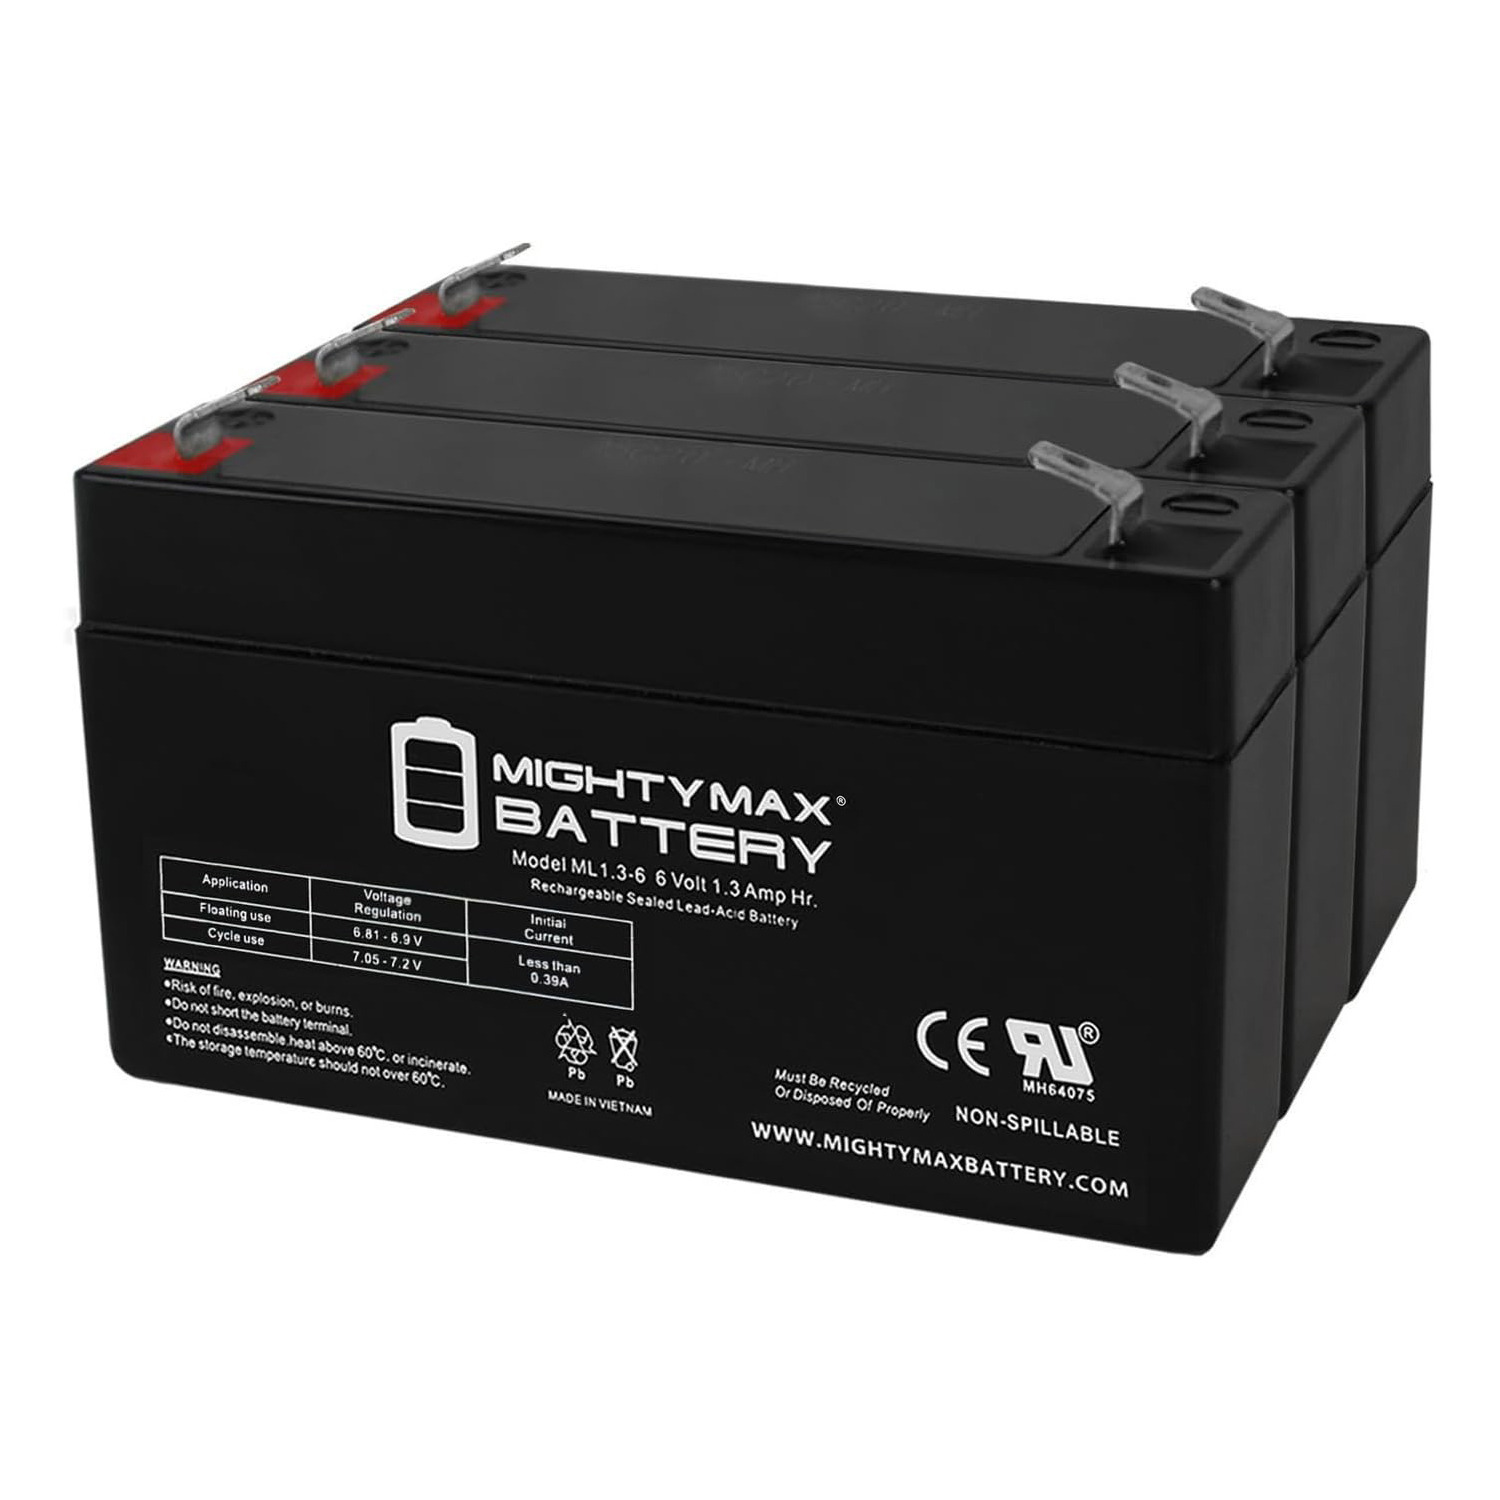 6V 1.3Ah SLA Replacement Battery for Exell D5731 - 3 Pack